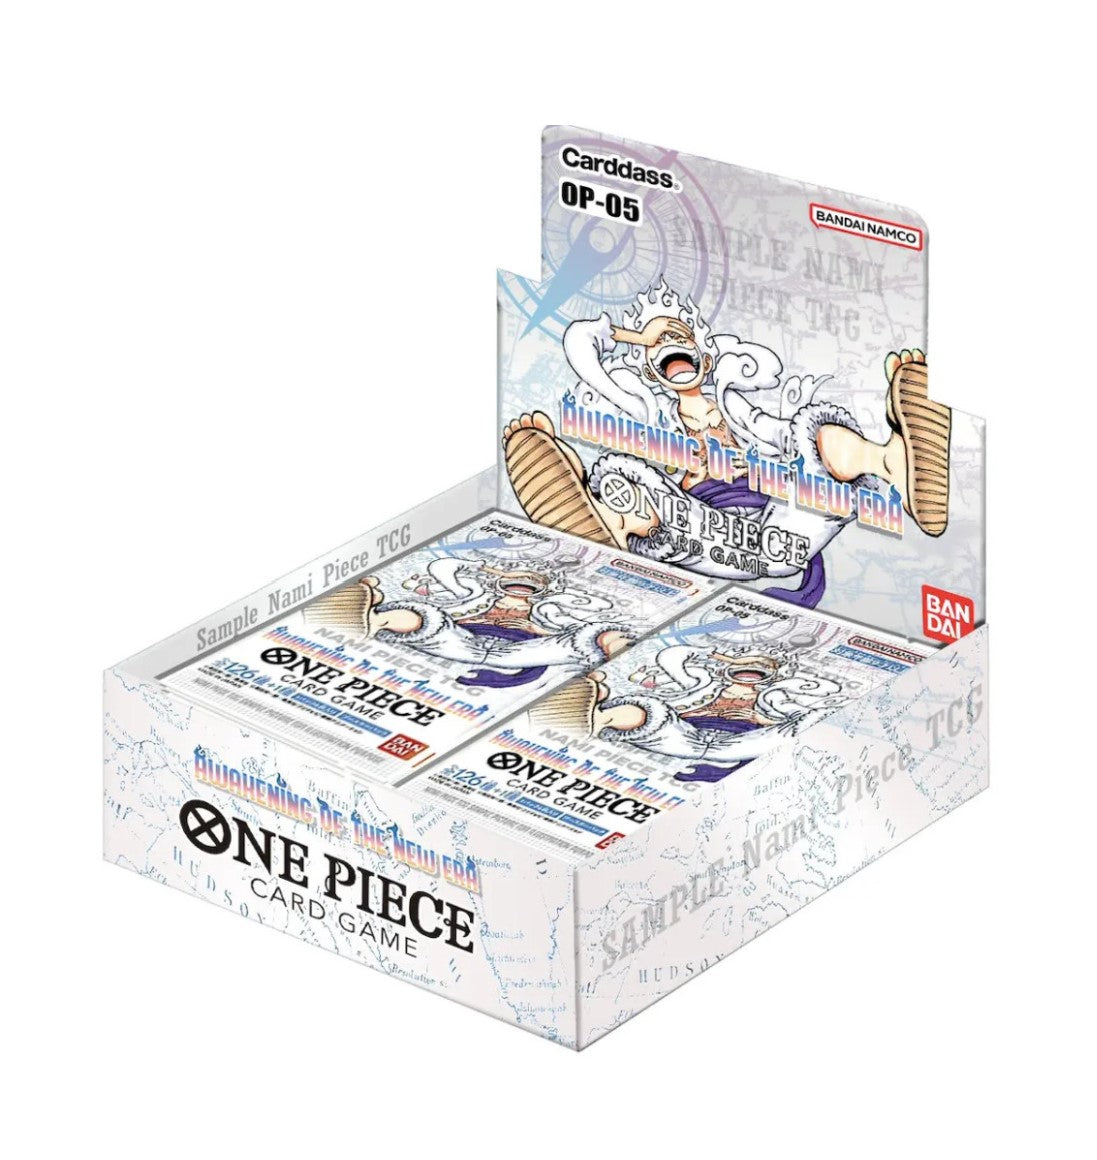 OP-05 One Piece Awakening of the New Era Booster Display (Factory Sealed) Ships 1/12